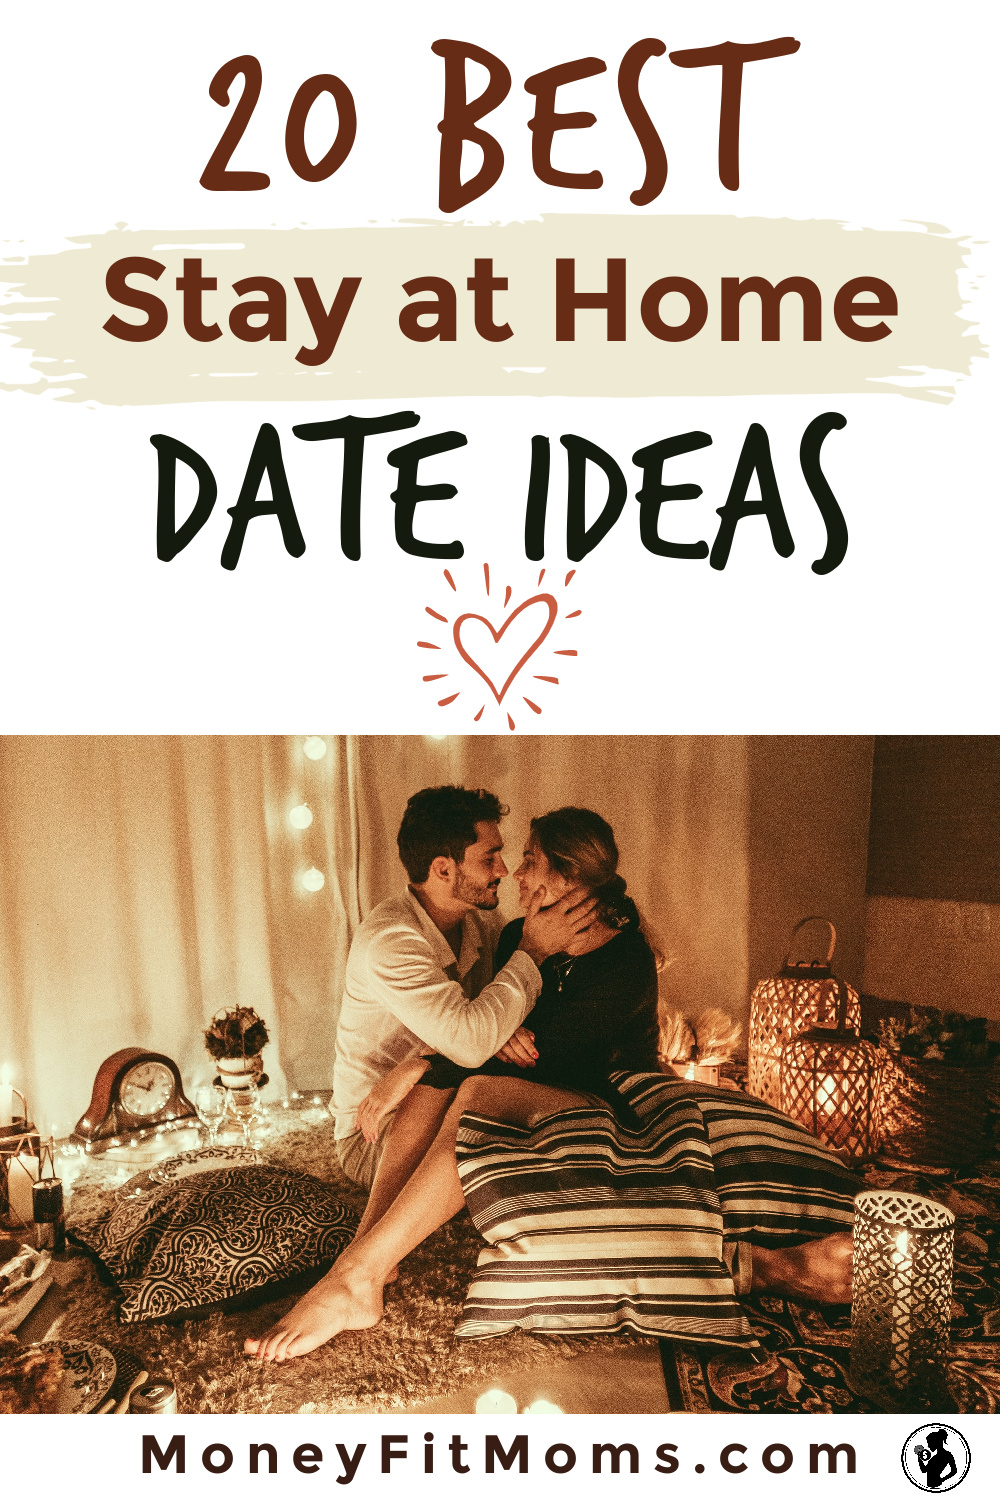 The 20 BEST Stay at Home Date Ideas - MoneyFitMoms.com